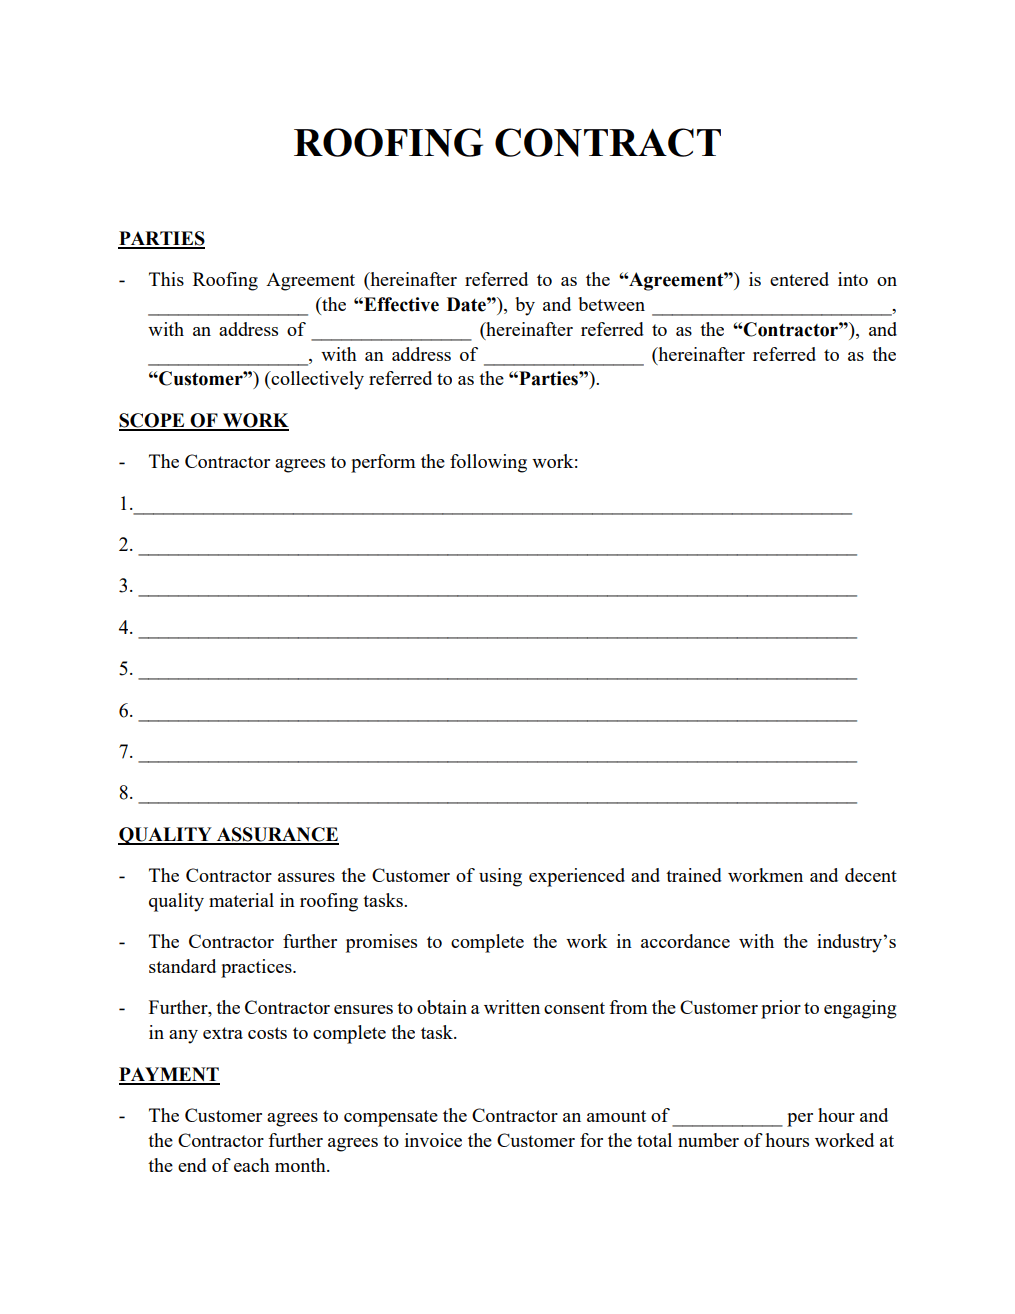 Roofing Contract Template.png